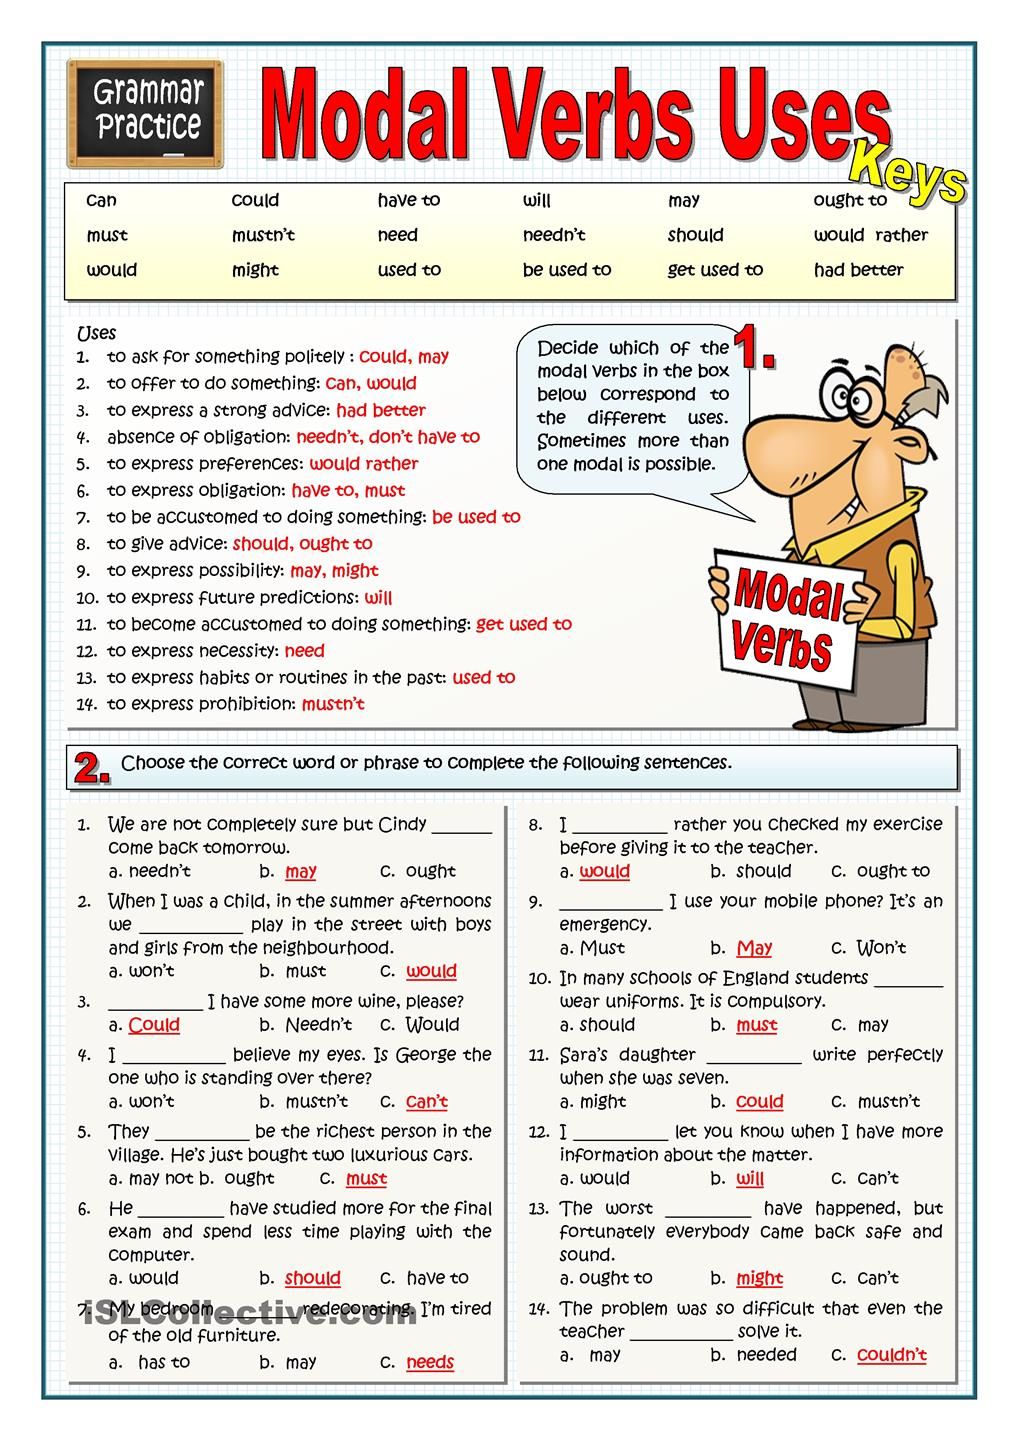 modal-verbs-exercises-with-answers-pdf-united-states-examples